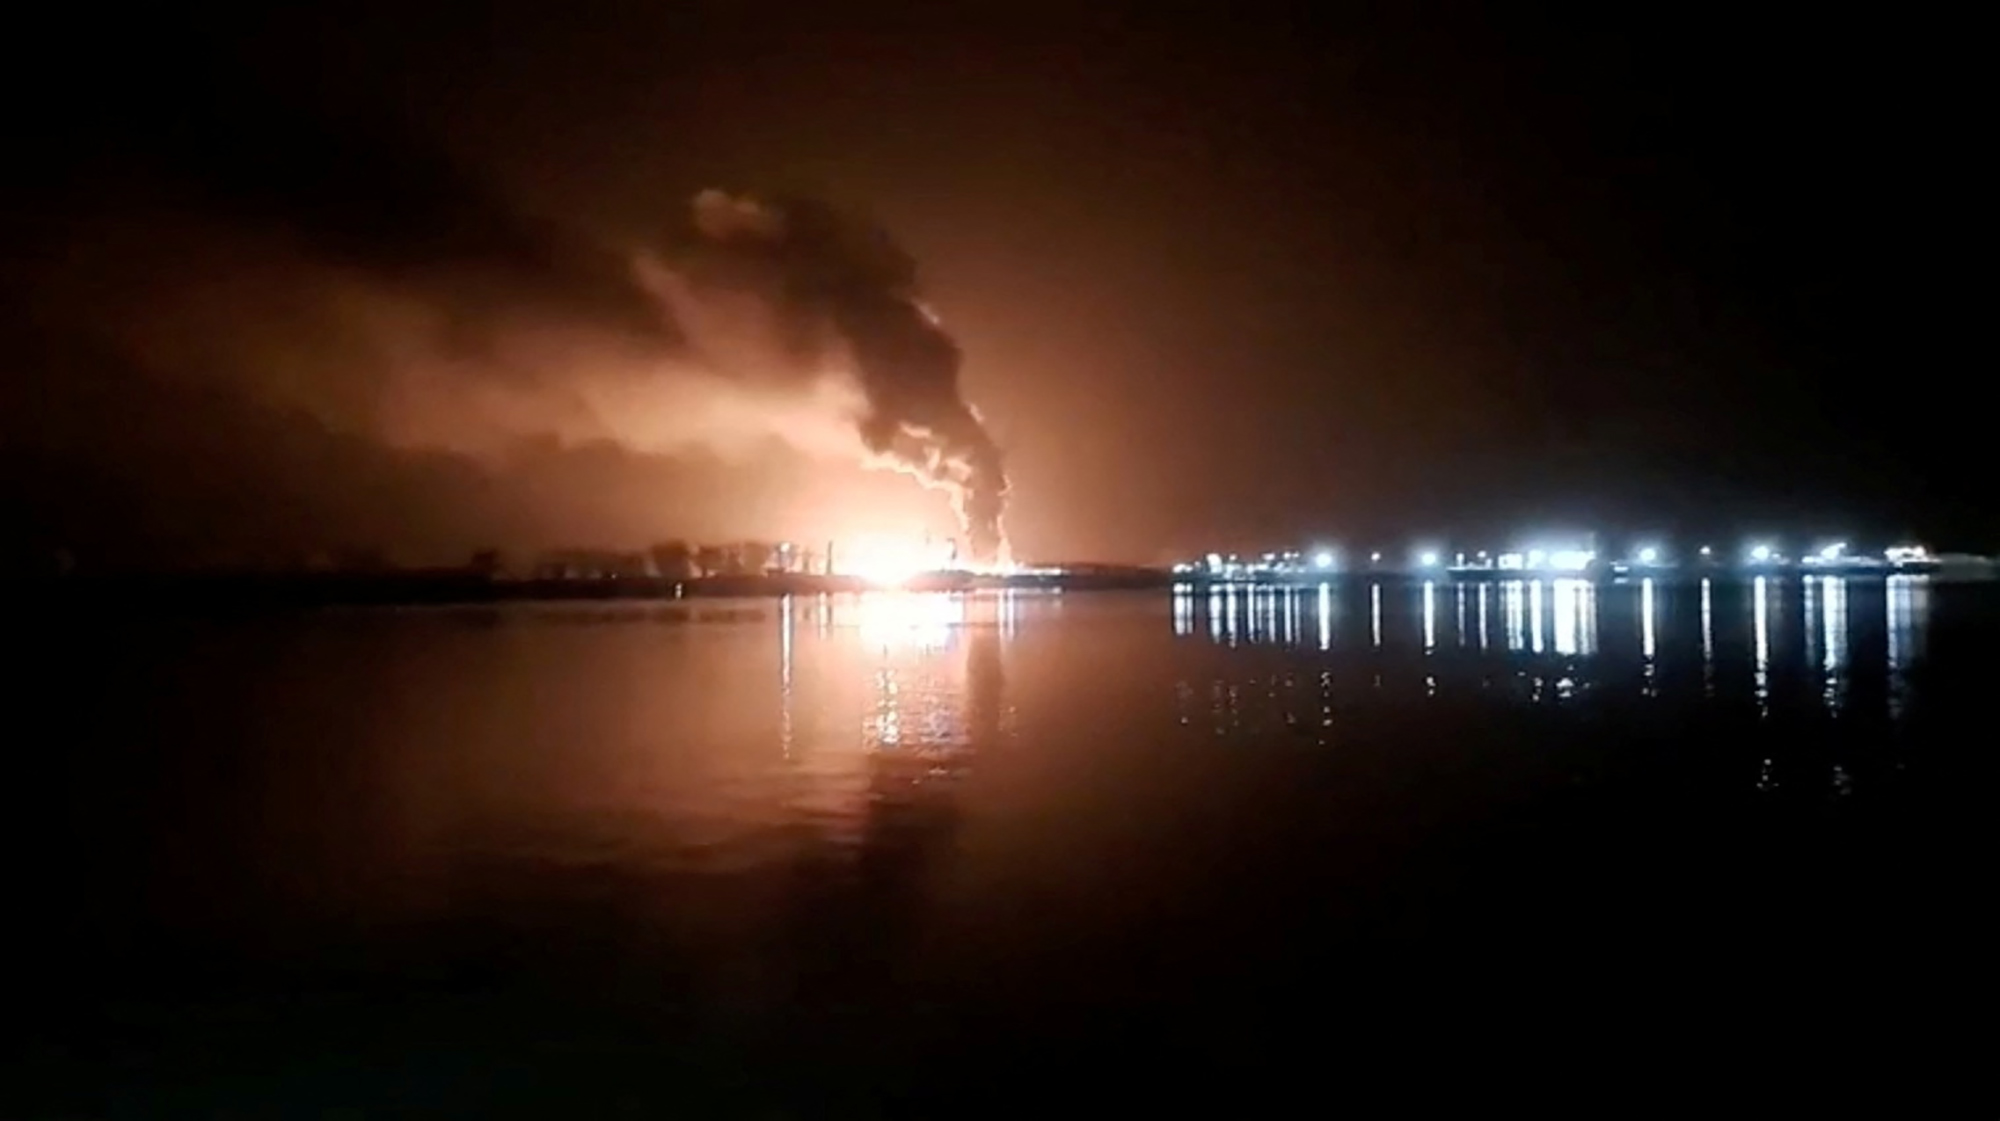 An explosion near Orlivka, Ukraine, on September 26, is seen in this screen grab from a video taken from a ferry on the way to Romania.